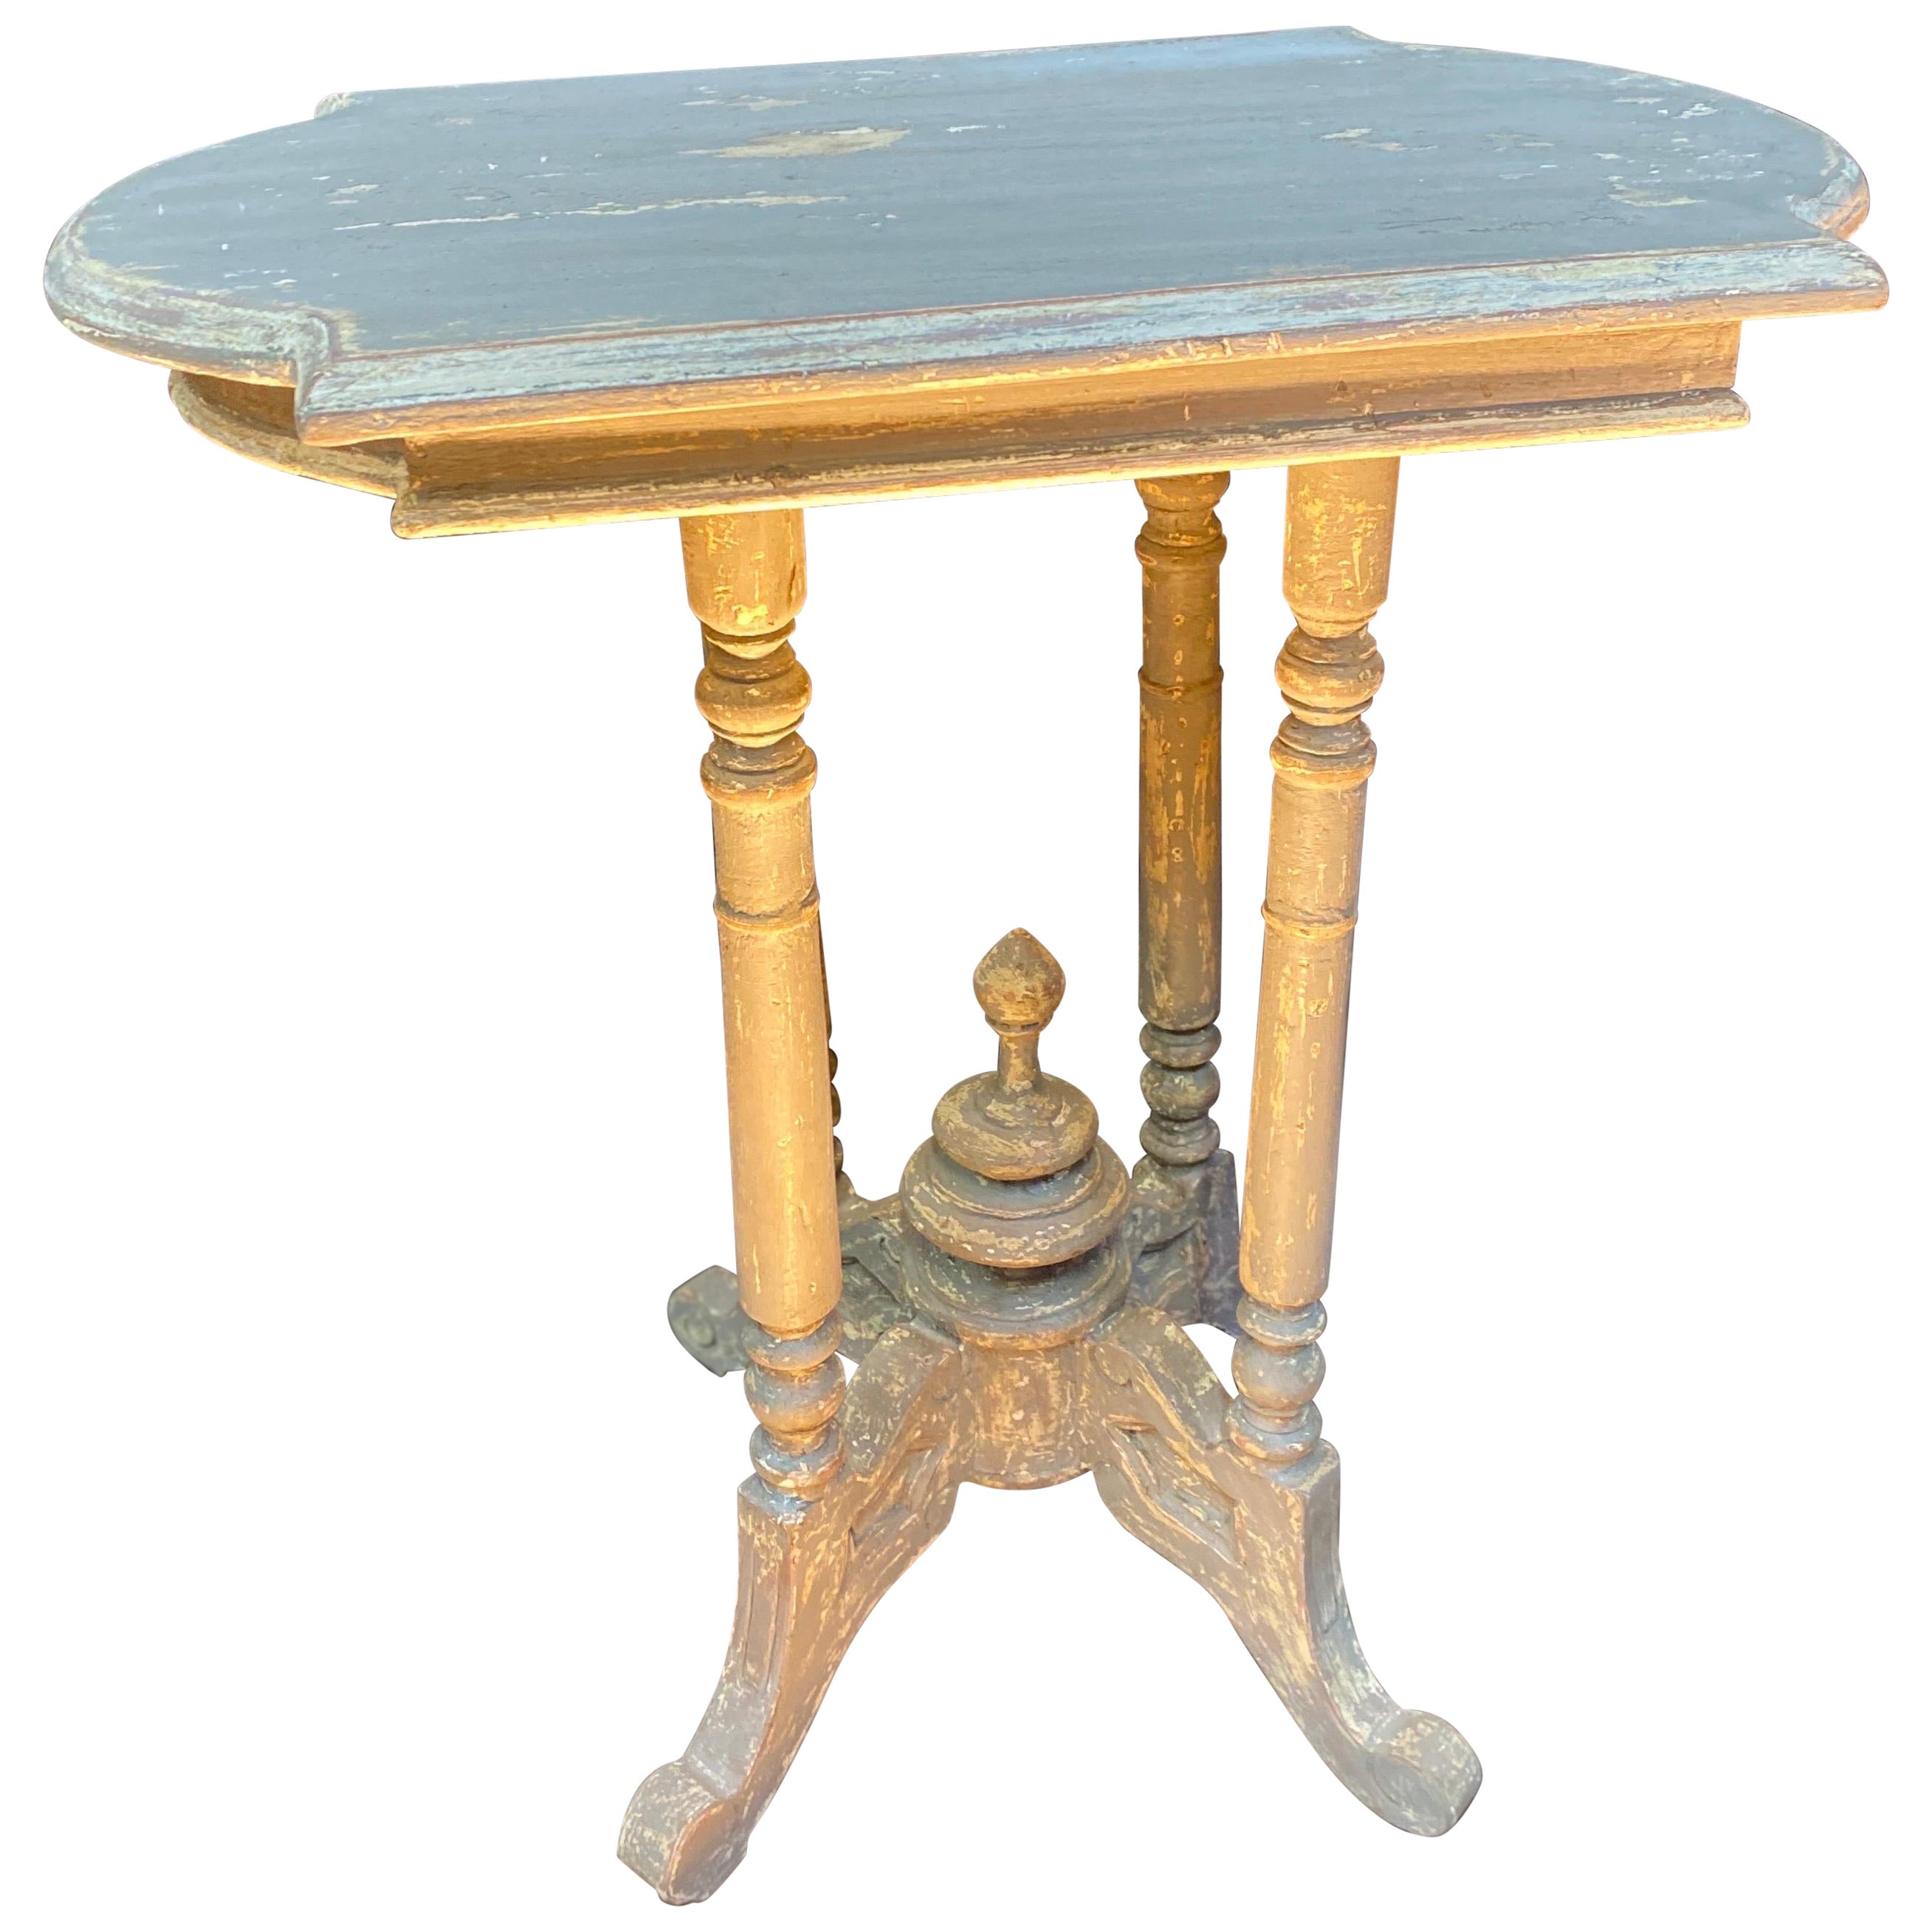 Napoléon iii pedestal table with patina dating from the 19th century  For Sale